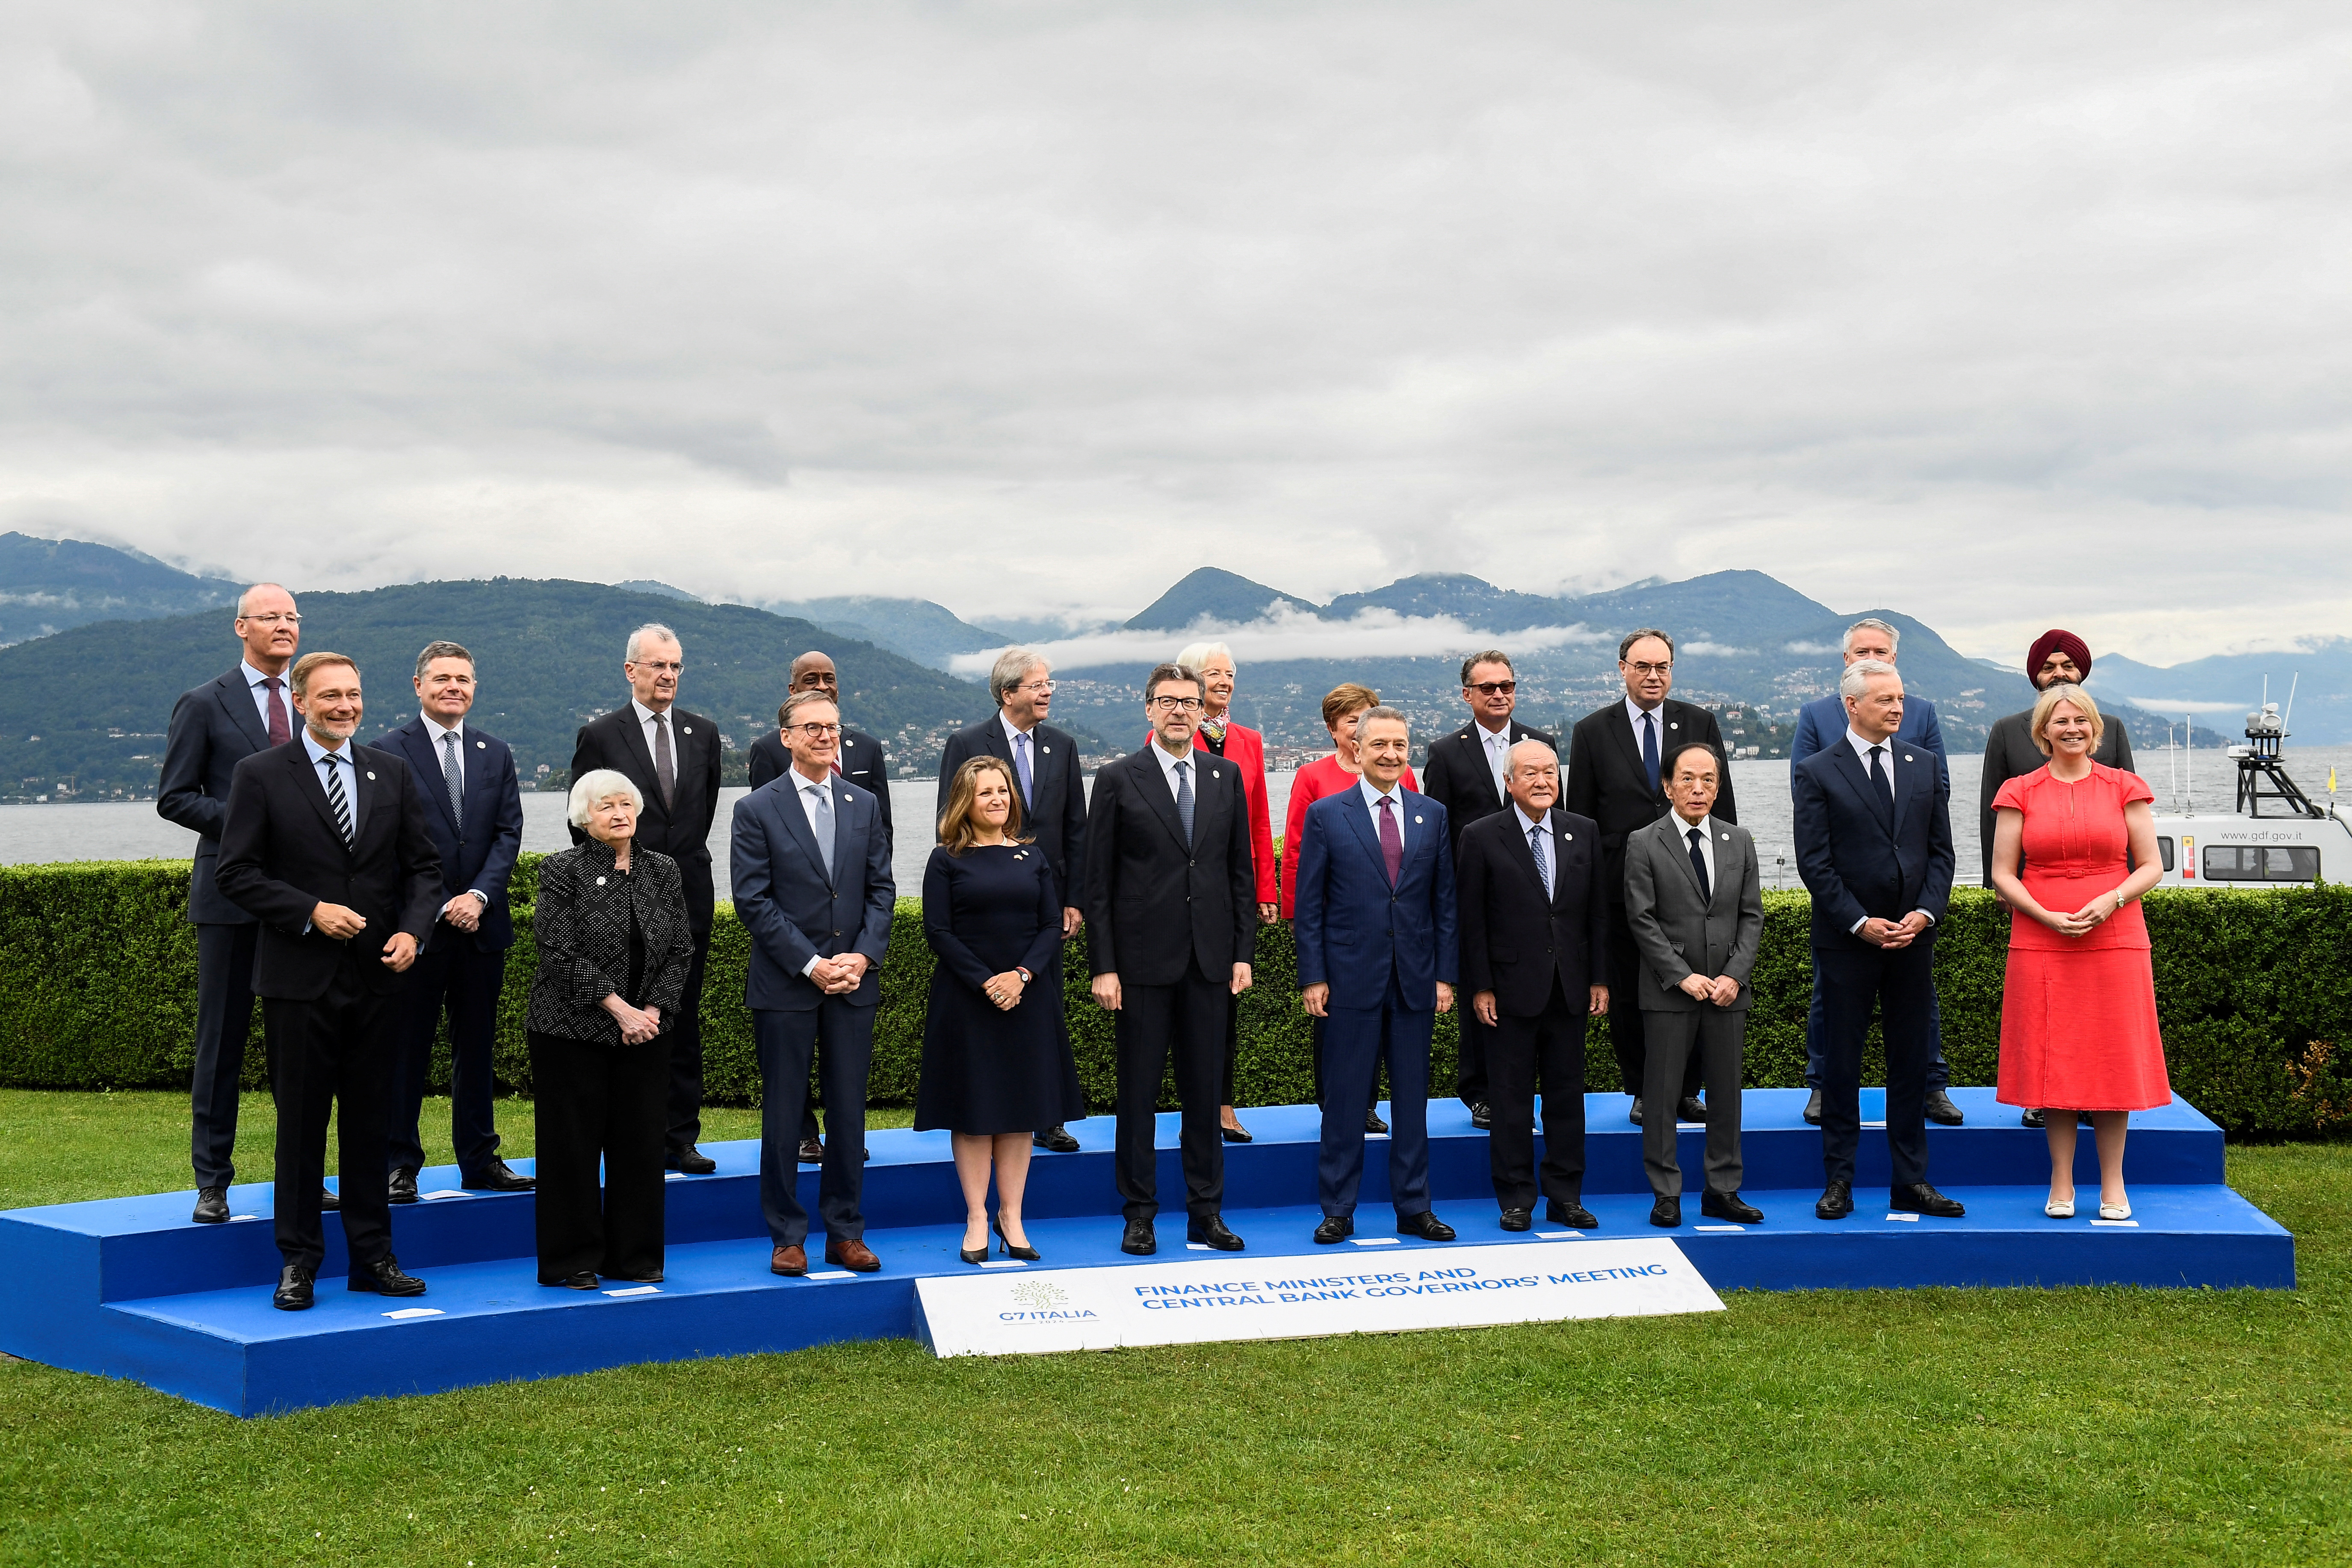 G7 Finance Ministers and Central Bank Governors' Meeting in Italy